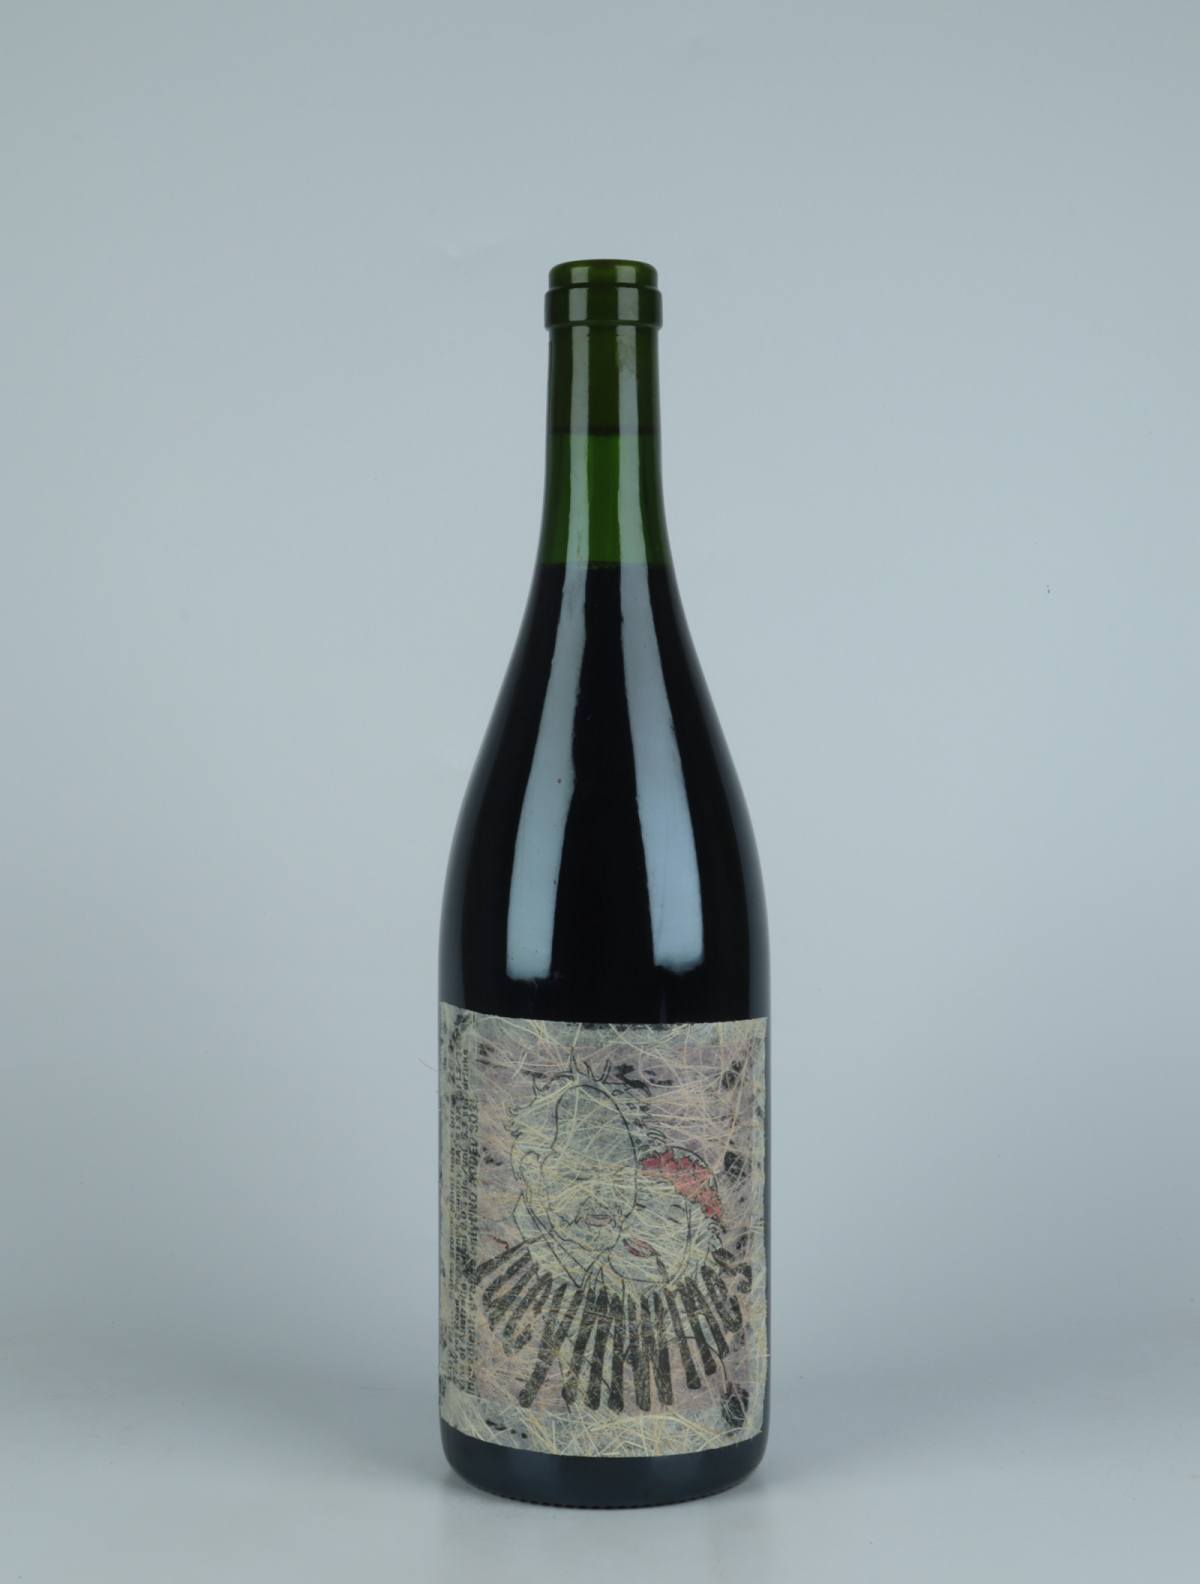 A bottle 2022 Home Grown Pinot Noir Red wine from Lucy Margaux, Adelaide Hills in Australia